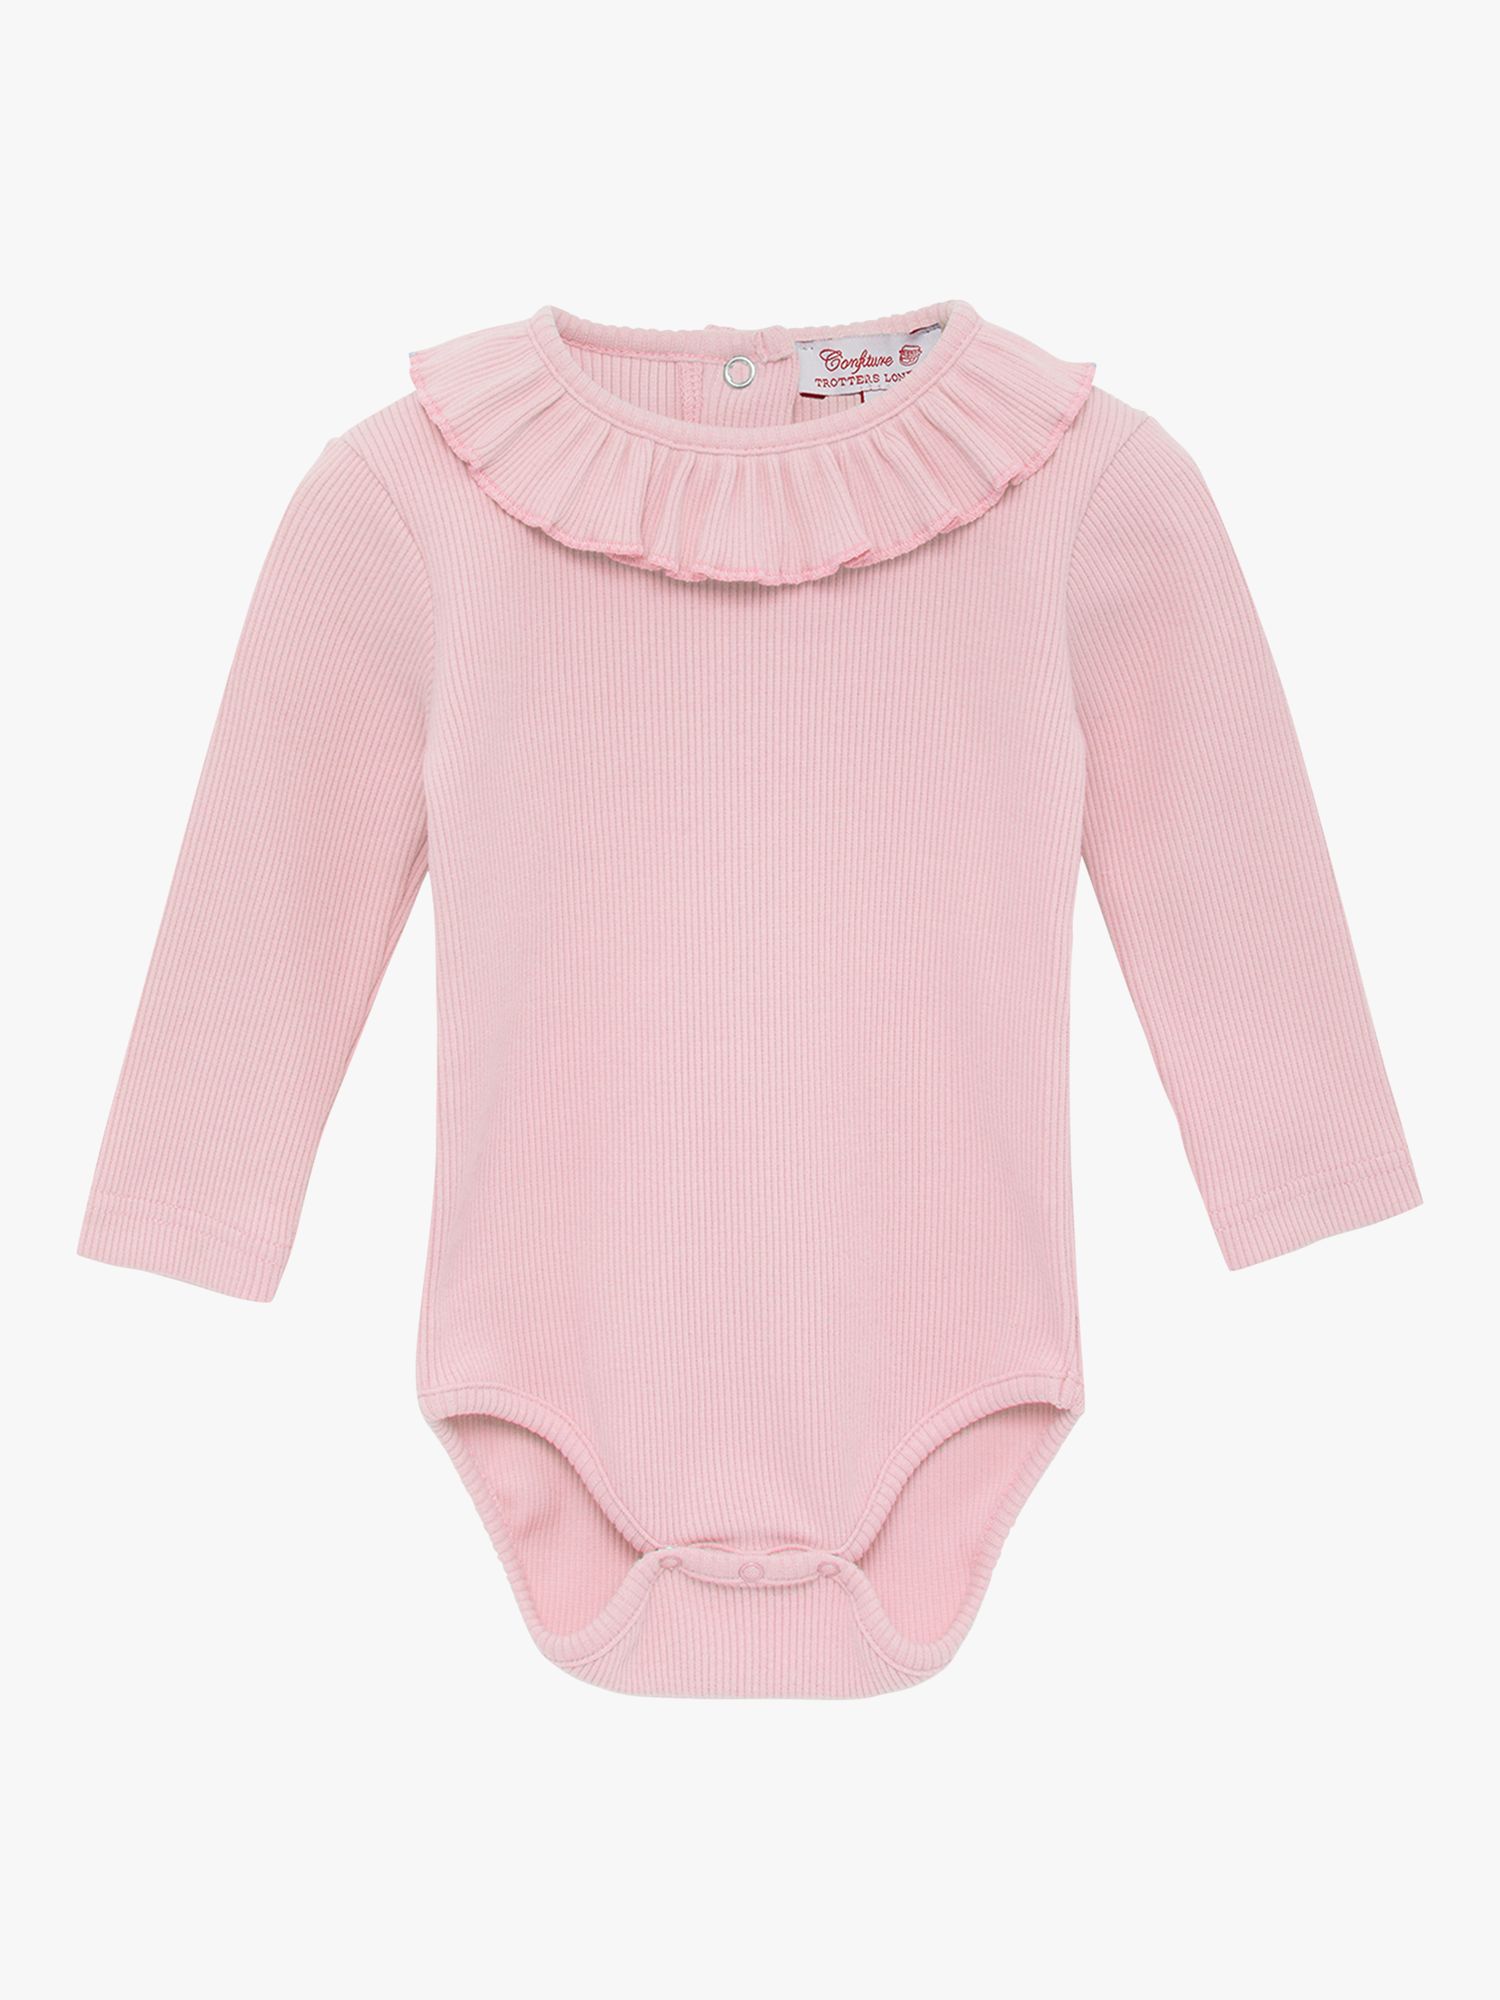 Trotters Baby Grace Willow Collar Bodysuit, Dusty Pink at John Lewis ...